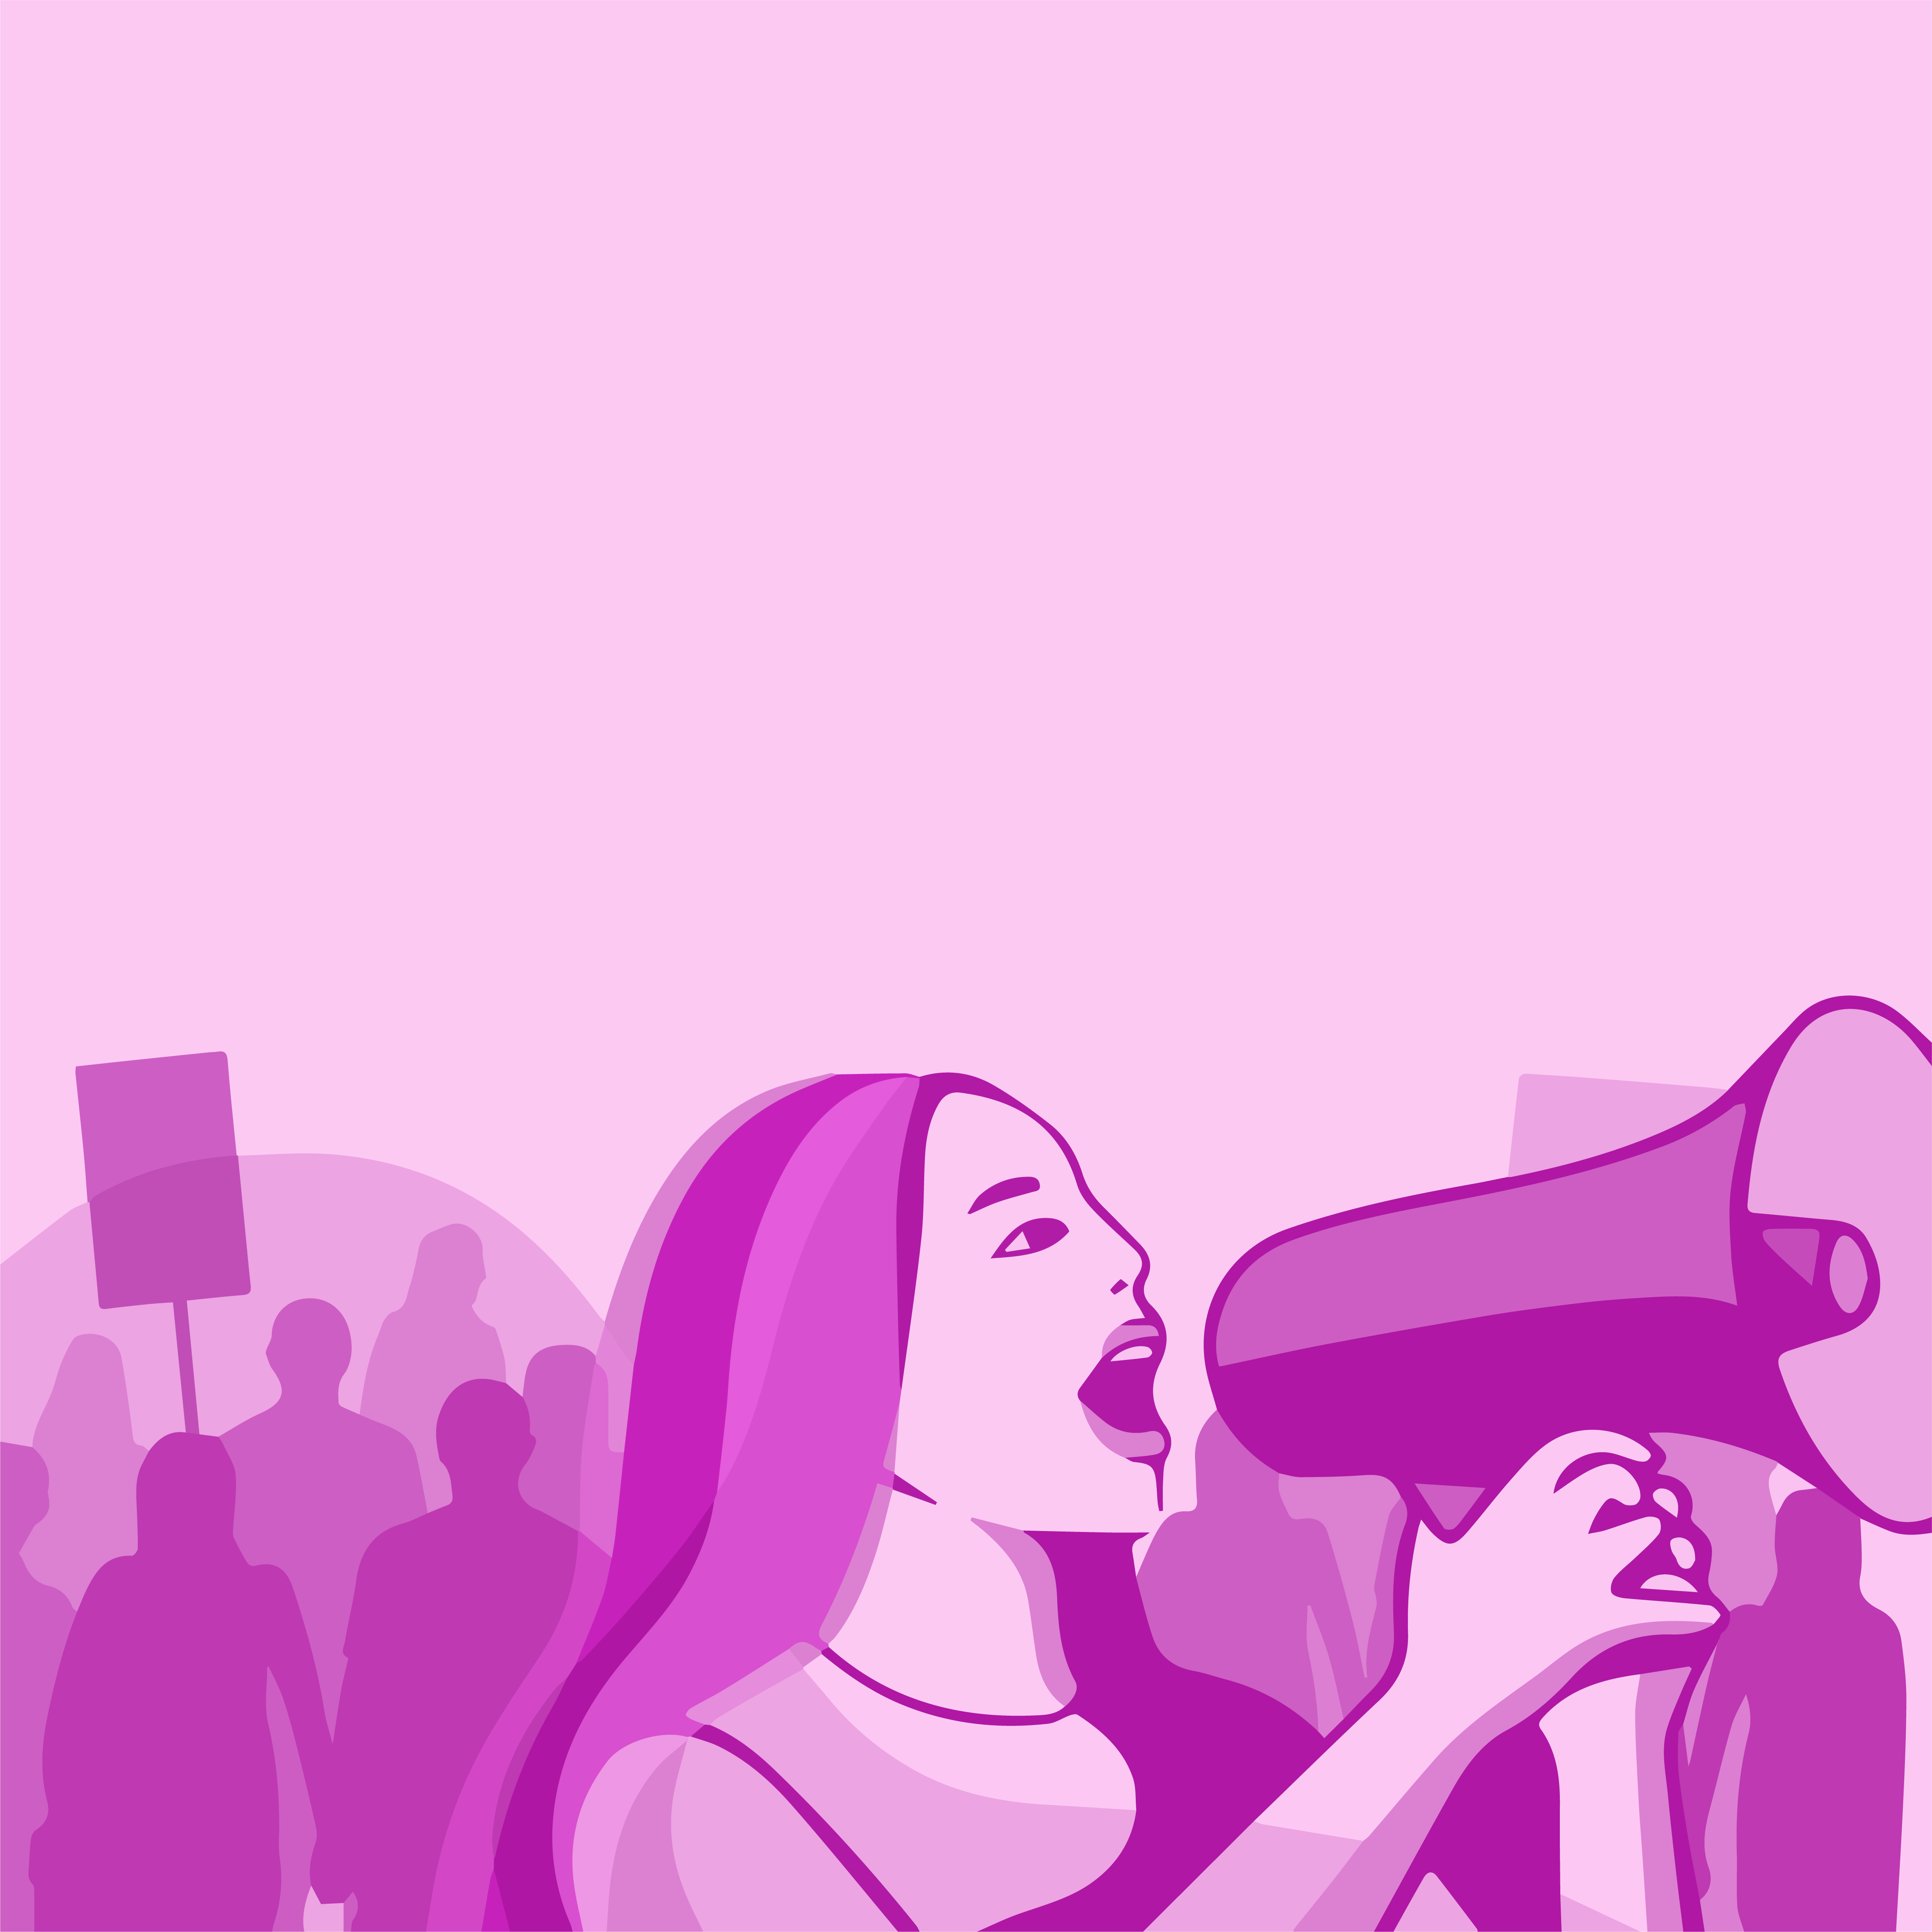 A graphic showing multiple figures at a protest, the one in foreground with a loudspeaker